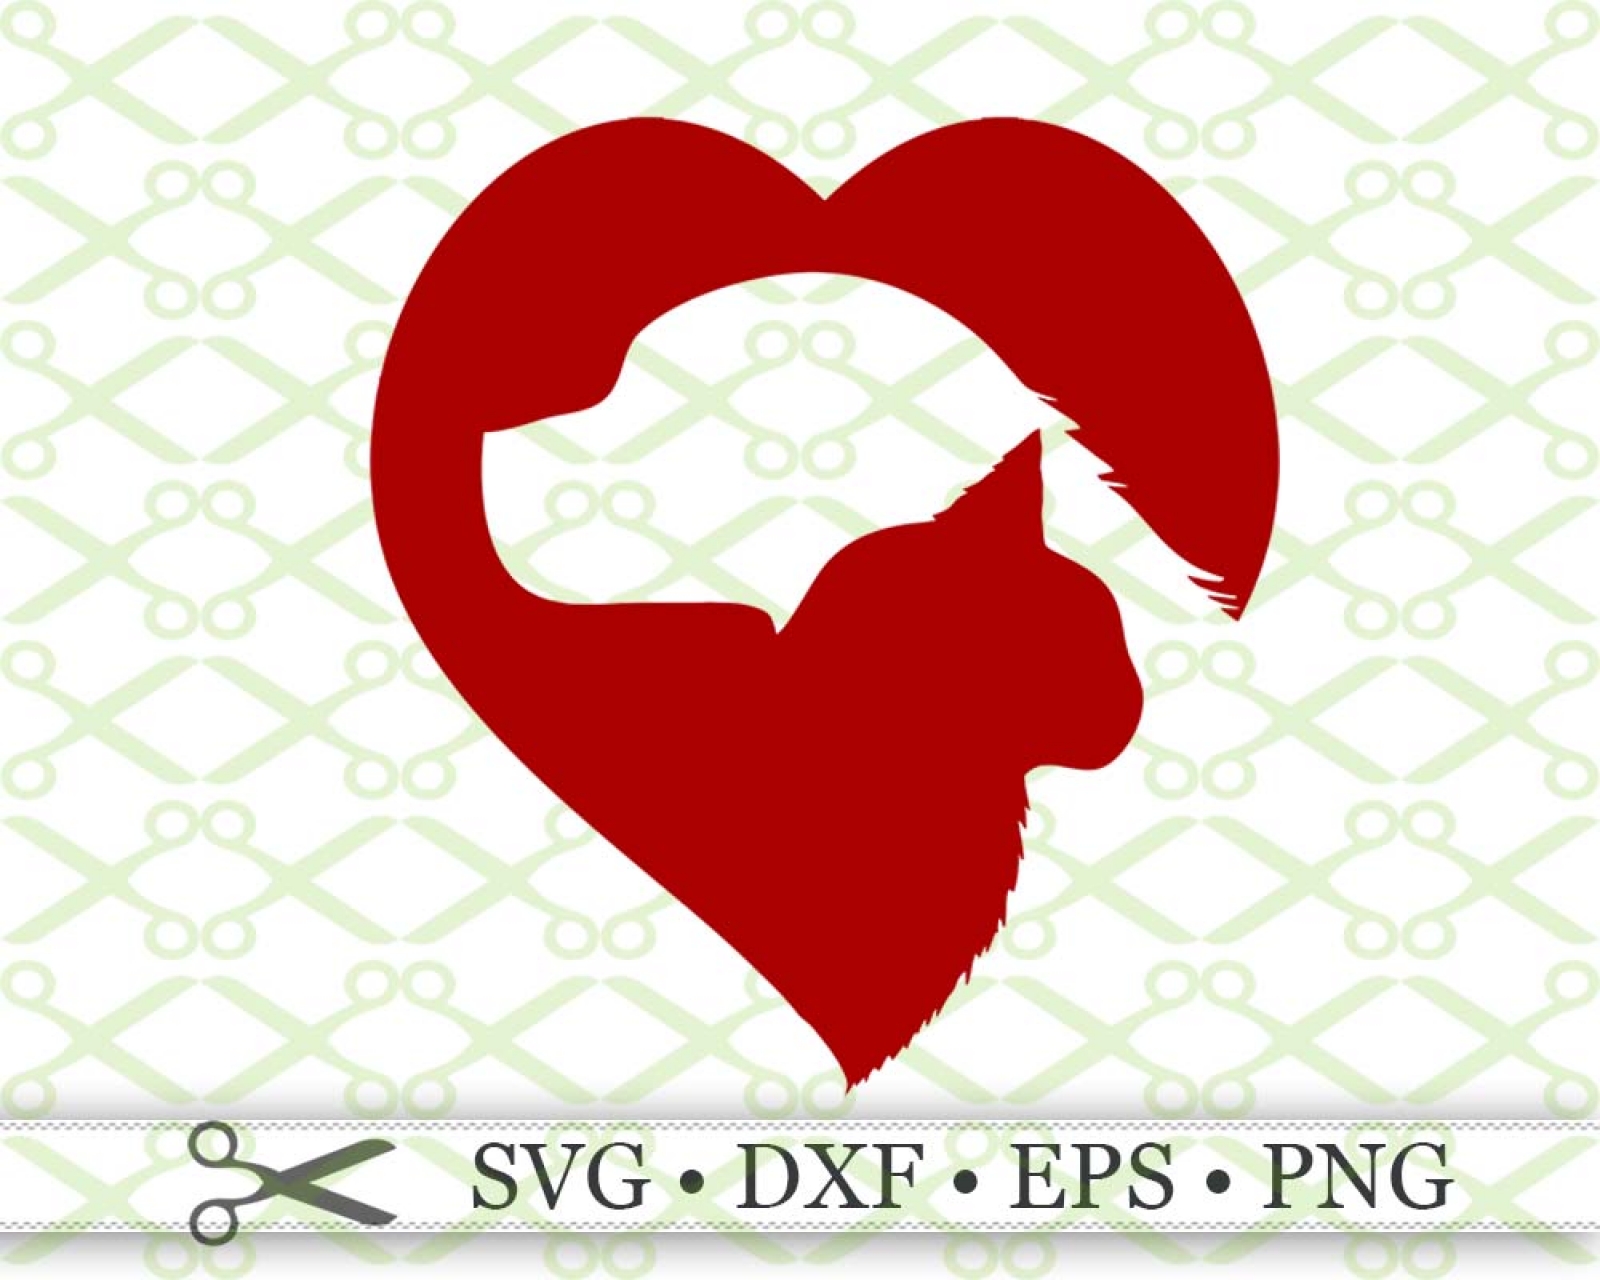 CAT & DOG SILHOUETTE HEART -Cricut & Silhouette Files SVG DXF EPS PNG